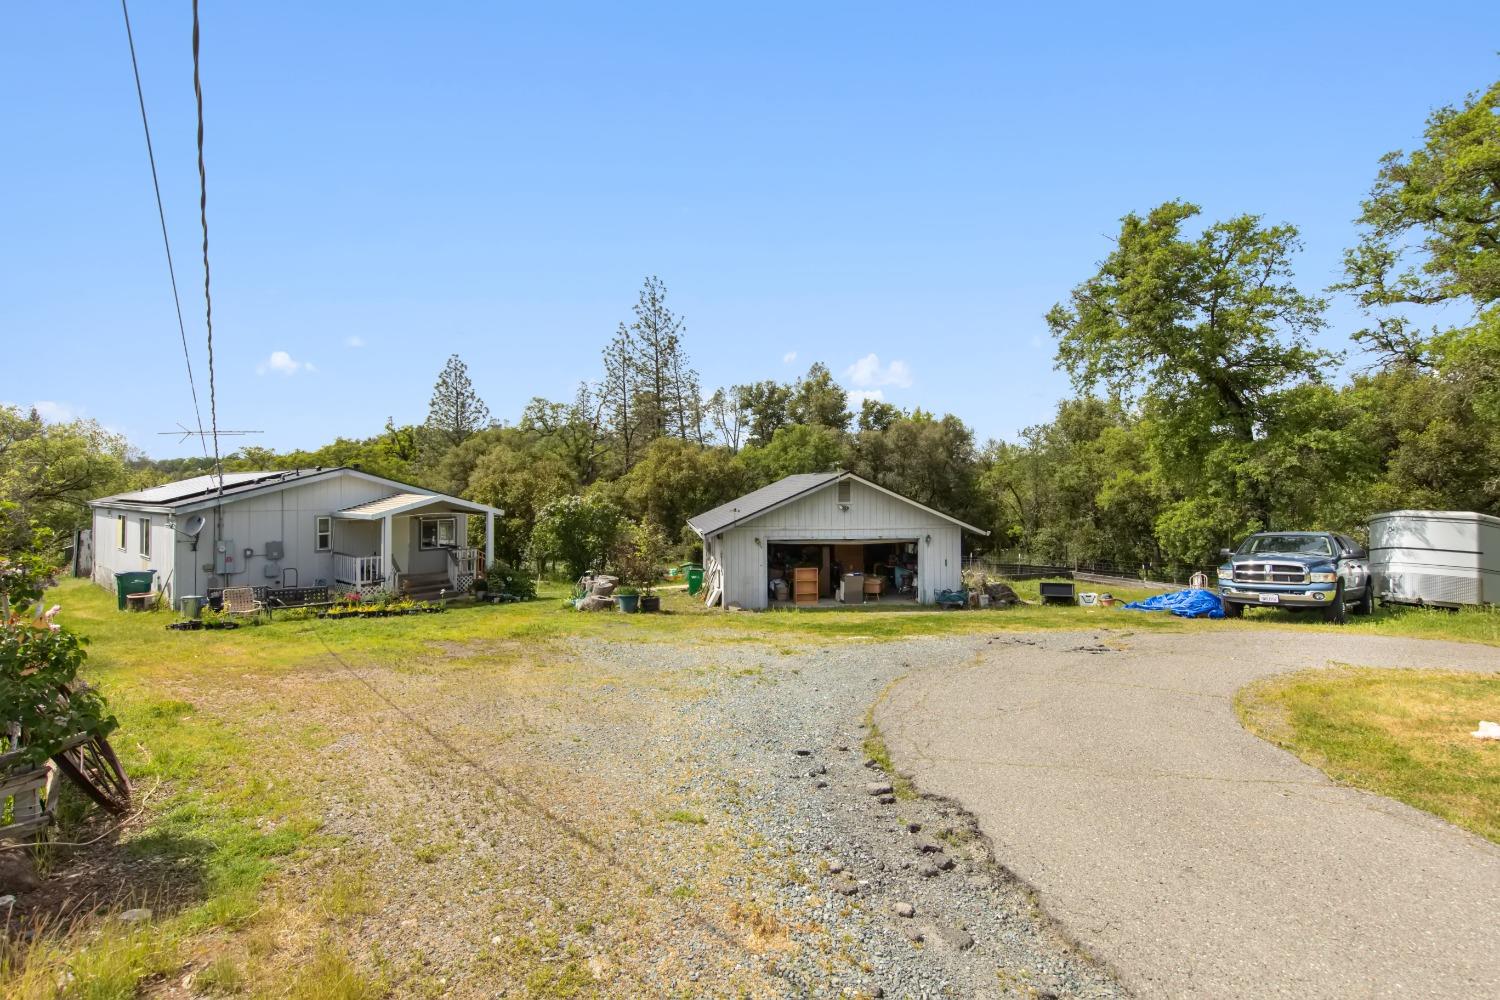 Photo of 10515 Wolf Rd in Grass Valley, CA